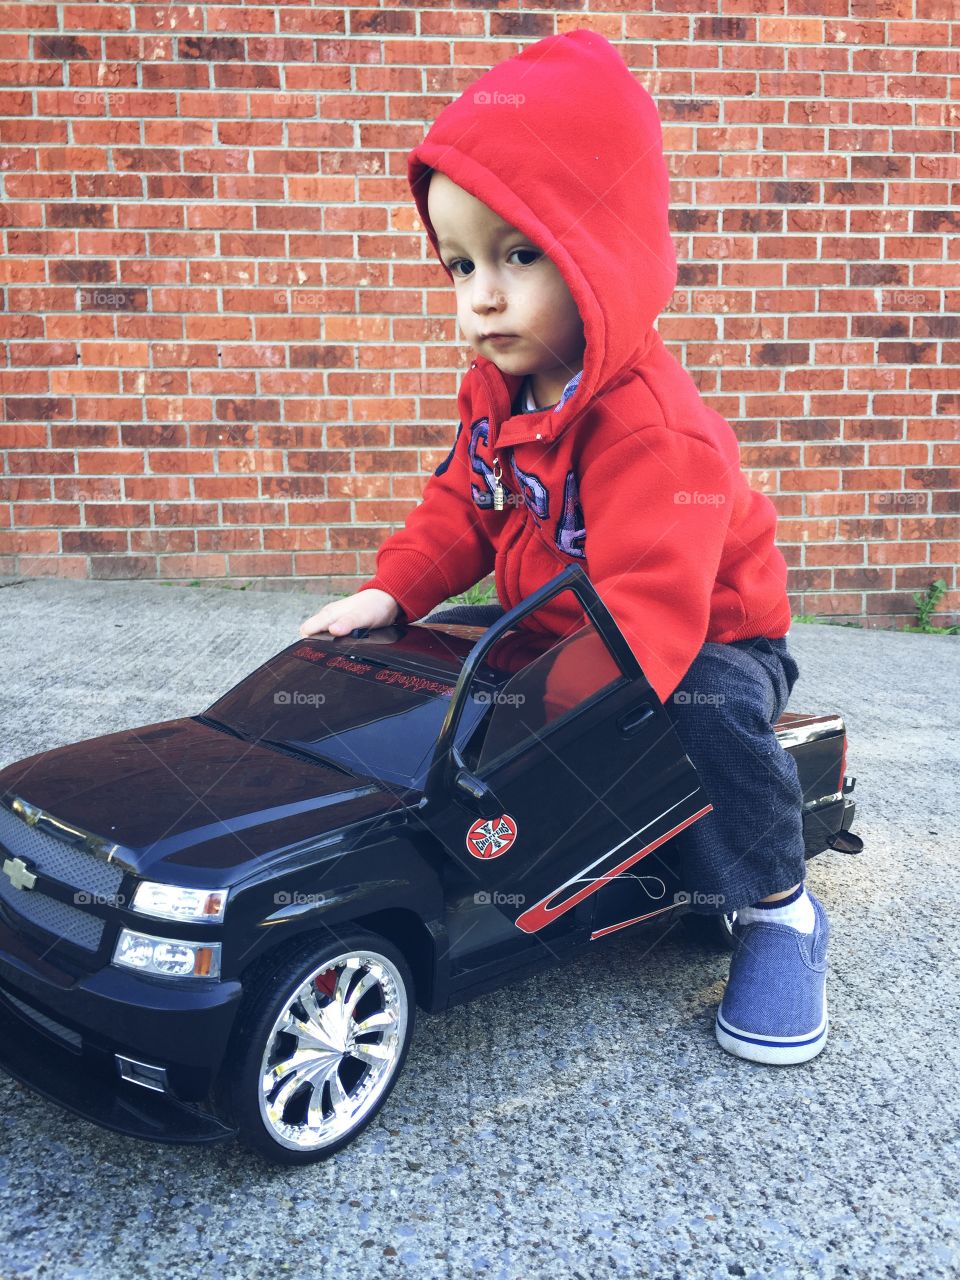 Baby sitting on small toy car